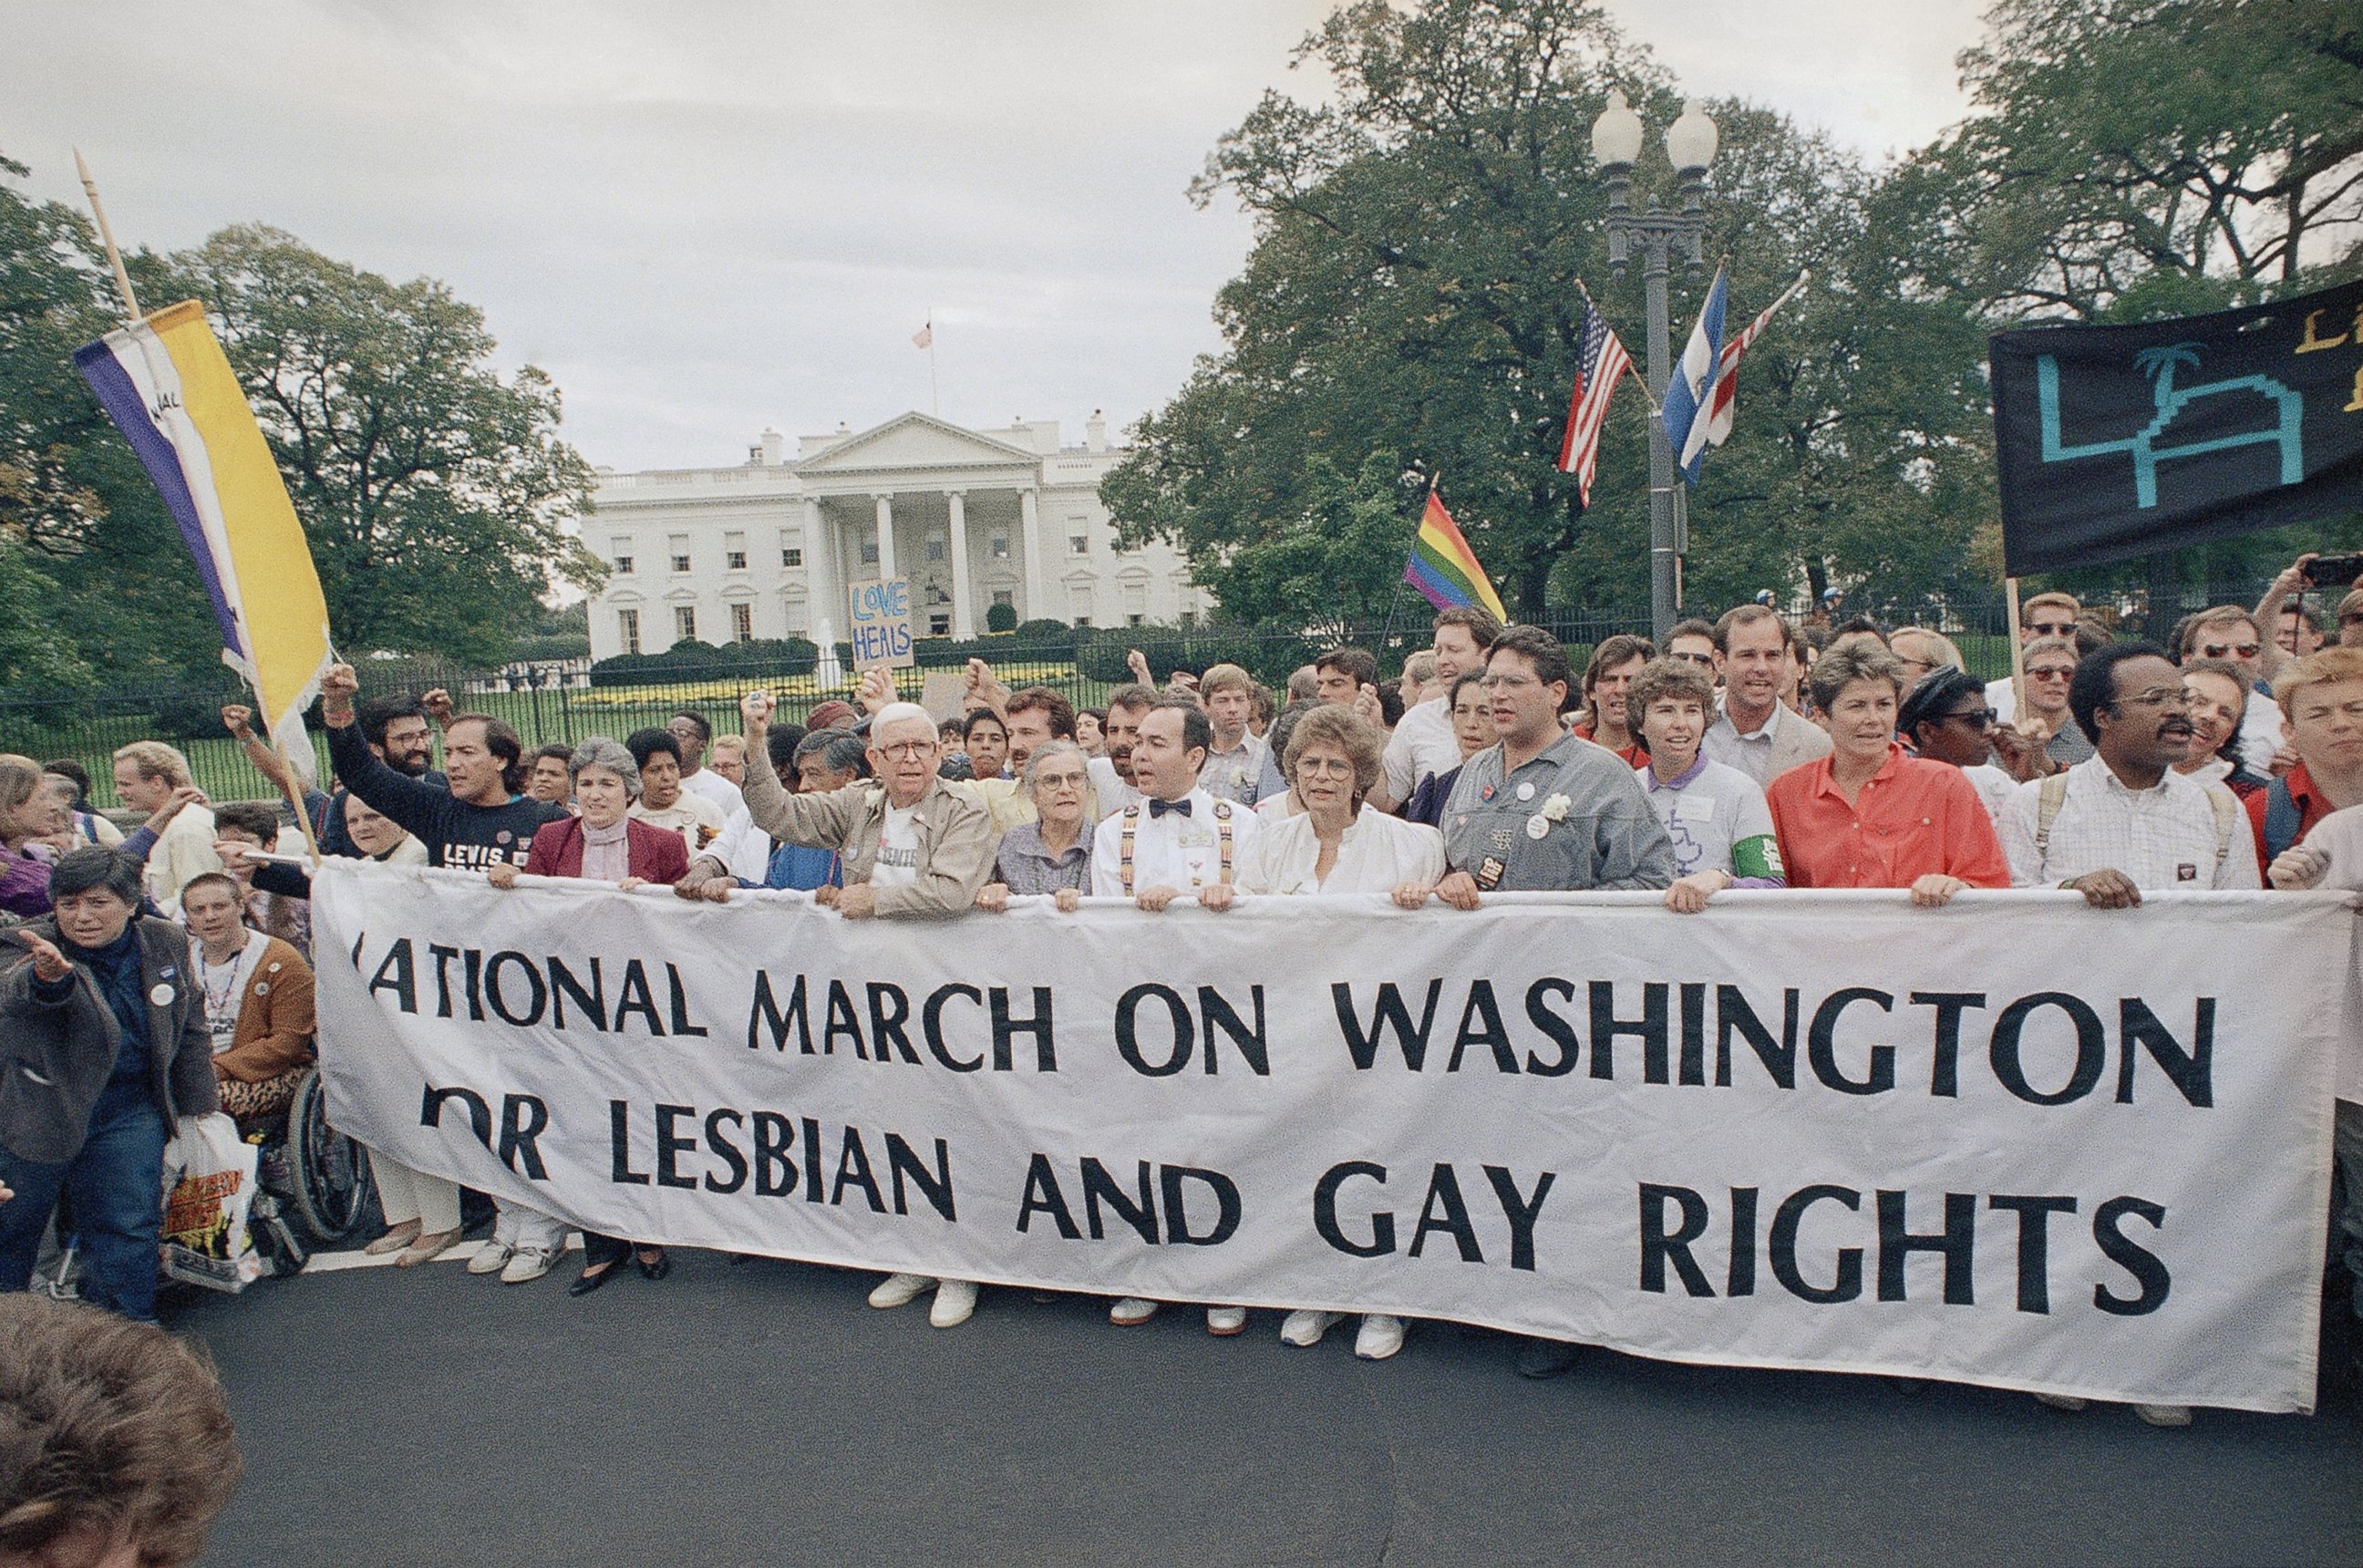 PHOTO: Participants of the National March on Washington for Lesbian and Gay Rights carry a banner as they parade in front of the White House, Oct. 11, 1987, in Washington.